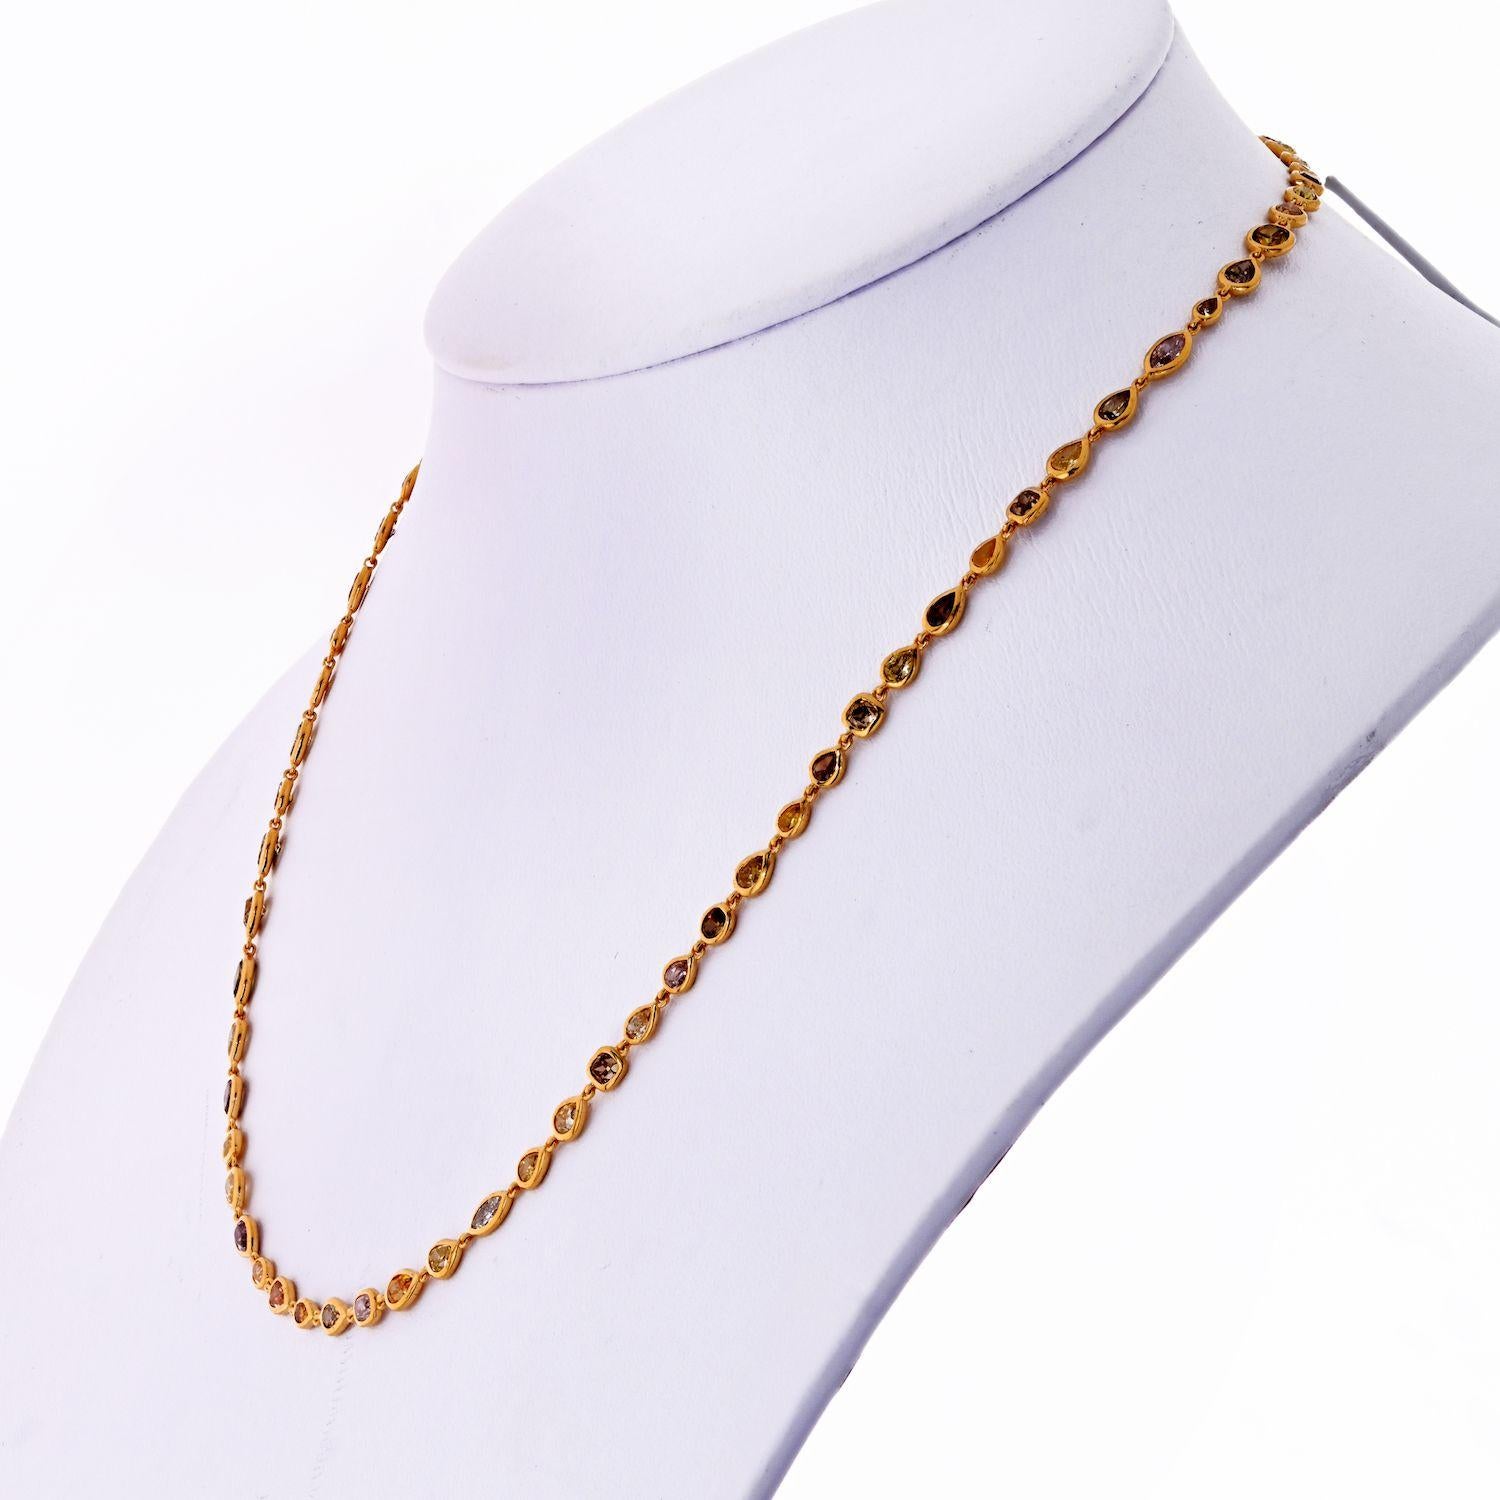 Handmade diamond by the yard necklace crafted in house by our jewelers. Made in 18K yellow gold set with all natural fancy color and white diamonds of different diamond cuts. Total Carat Weight 10cts. 
Length: 17 inches. 
Solid strong frames, smooth